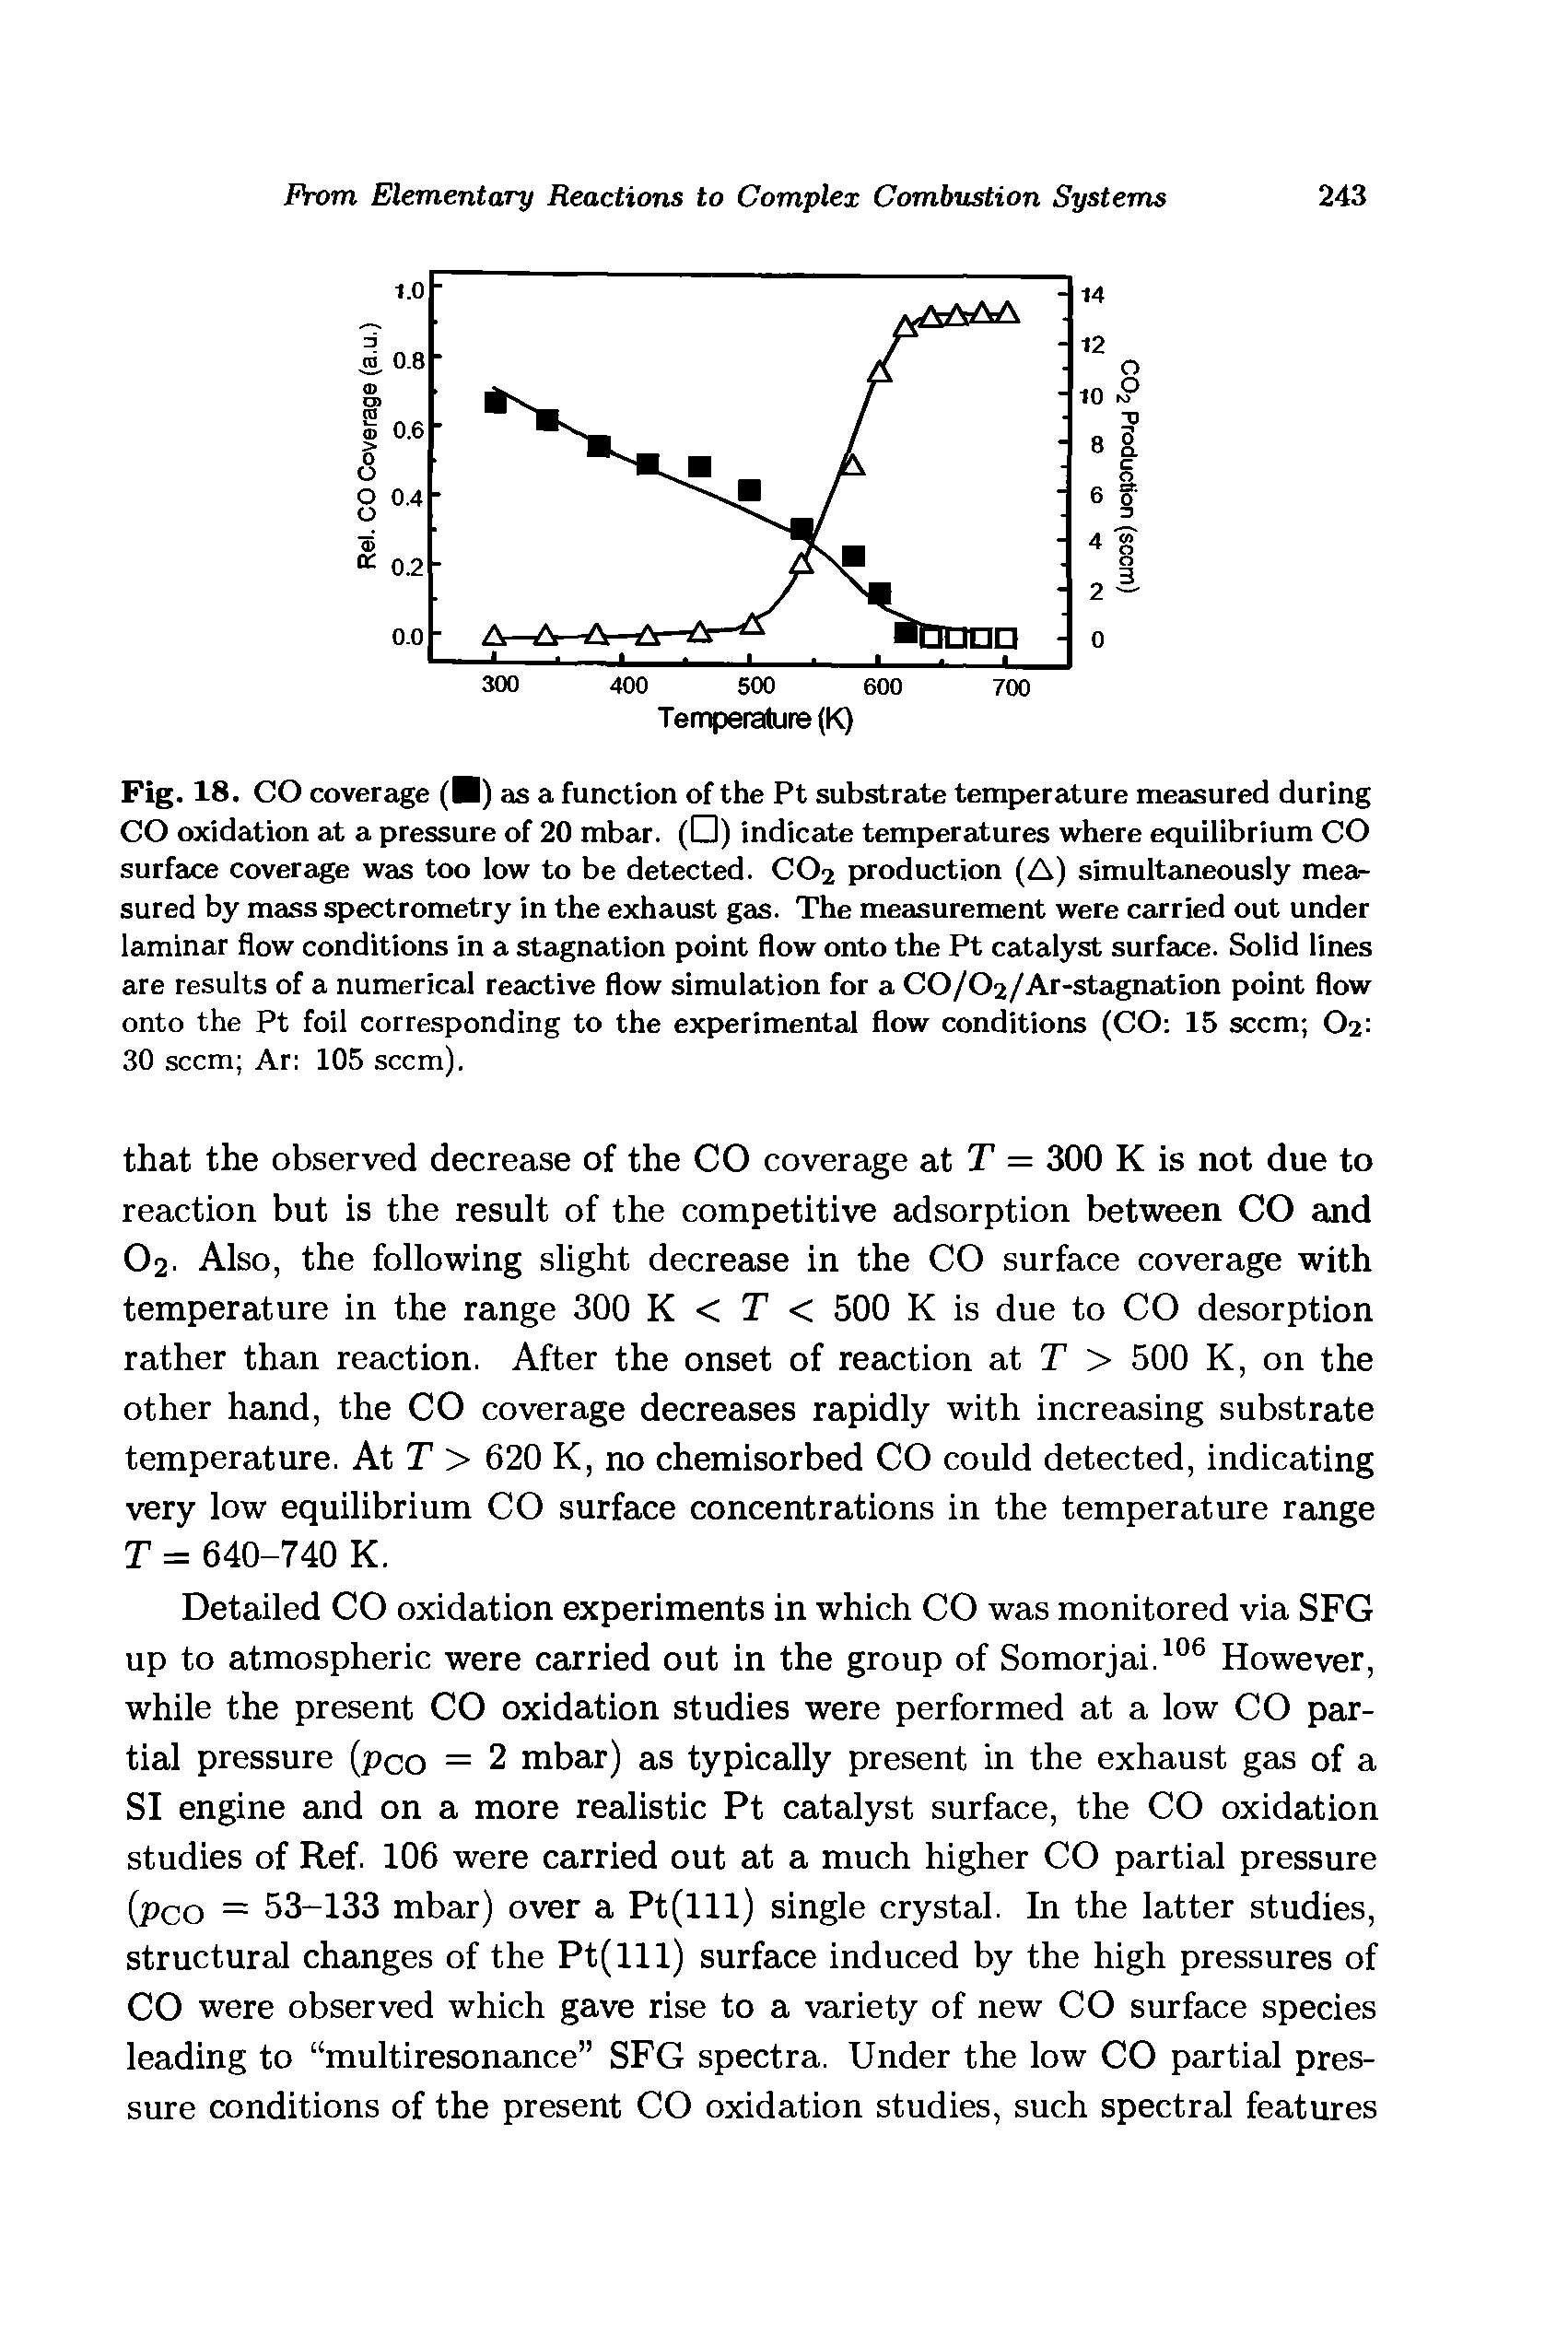 Fig. 18. CO coverage (H) as a function of the Pt substrate temperature measured during CO oxidation at a pressure of 20 mbar. (D) indicate temperatures where equilibrium CO surface coverage was too low to be detected. CO2 production (A) simultaneously measured by mass spectrometry in the exhaust gas. The measurement were carried out under laminar flow conditions in a stagnation point flow onto the Pt catalyst surface. Solid lines are results of a numerical reactive flow simulation for a CO/02/Ar-stagnation point flow onto the Pt foil corresponding to the experimental flow conditions (CO 15 seem O2 30 seem Ar 105 seem).